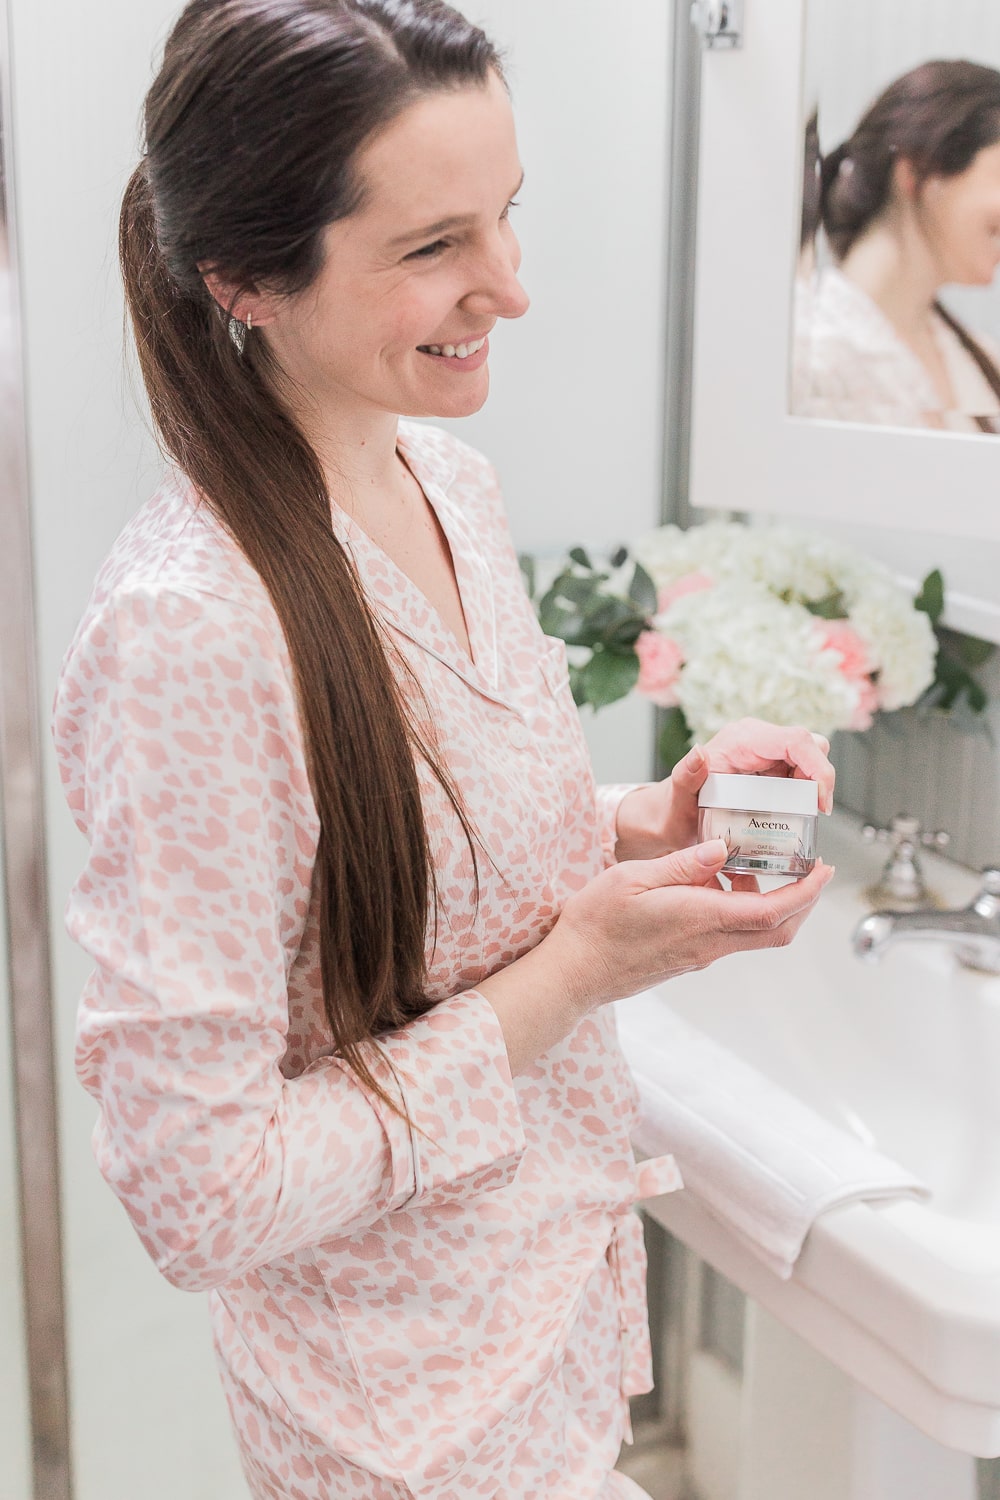 Aveeno Calm and Restore moisturizer review for women with sensitive skin by blogger Stephanie Ziajka on Diary of a Debutante